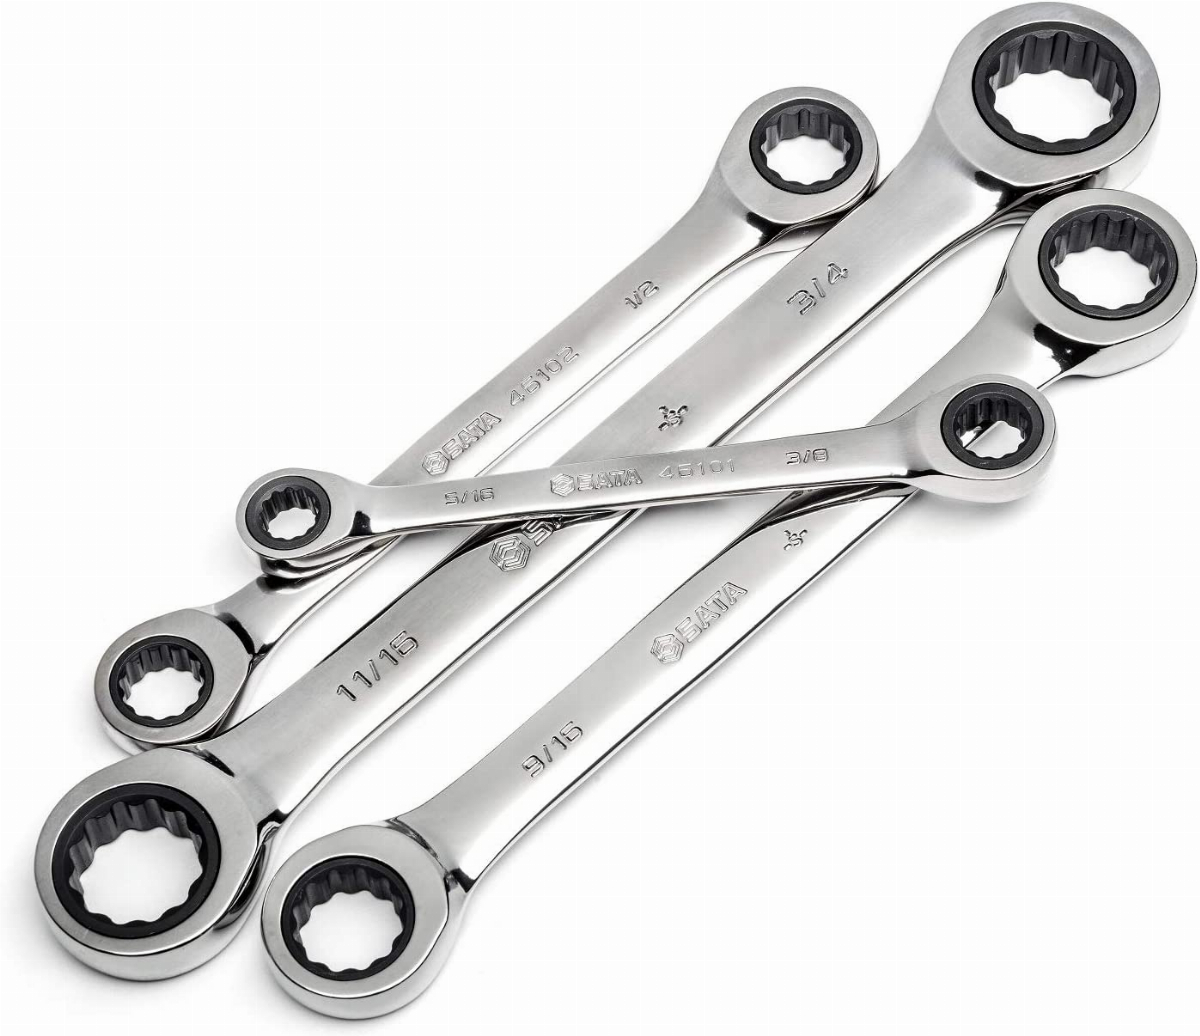 7/16 SATA 7-Piece SAE Full-Polished Chrome Ratcheting Wrench Set with Blow Molded Tray 1/2 12 Point/5/16 3/8 ST09023SJ 3/4-Inch 5/8 9/16 